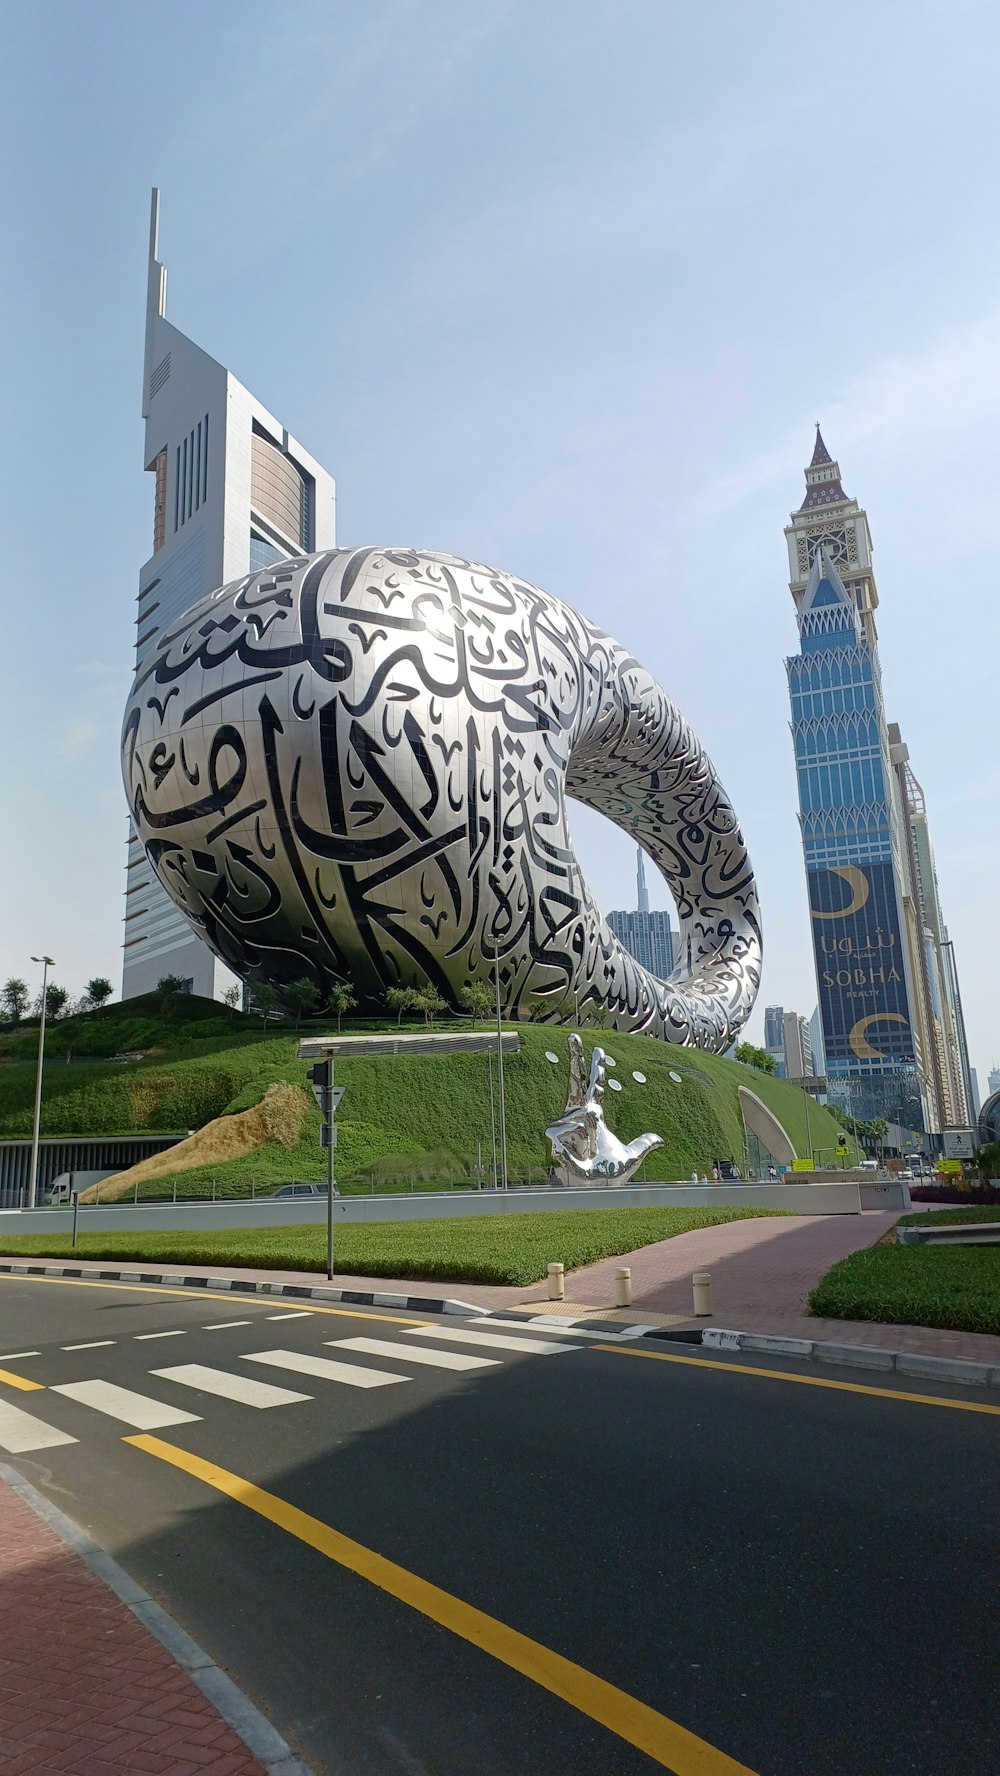 a giant turtle sculpture in front of a building